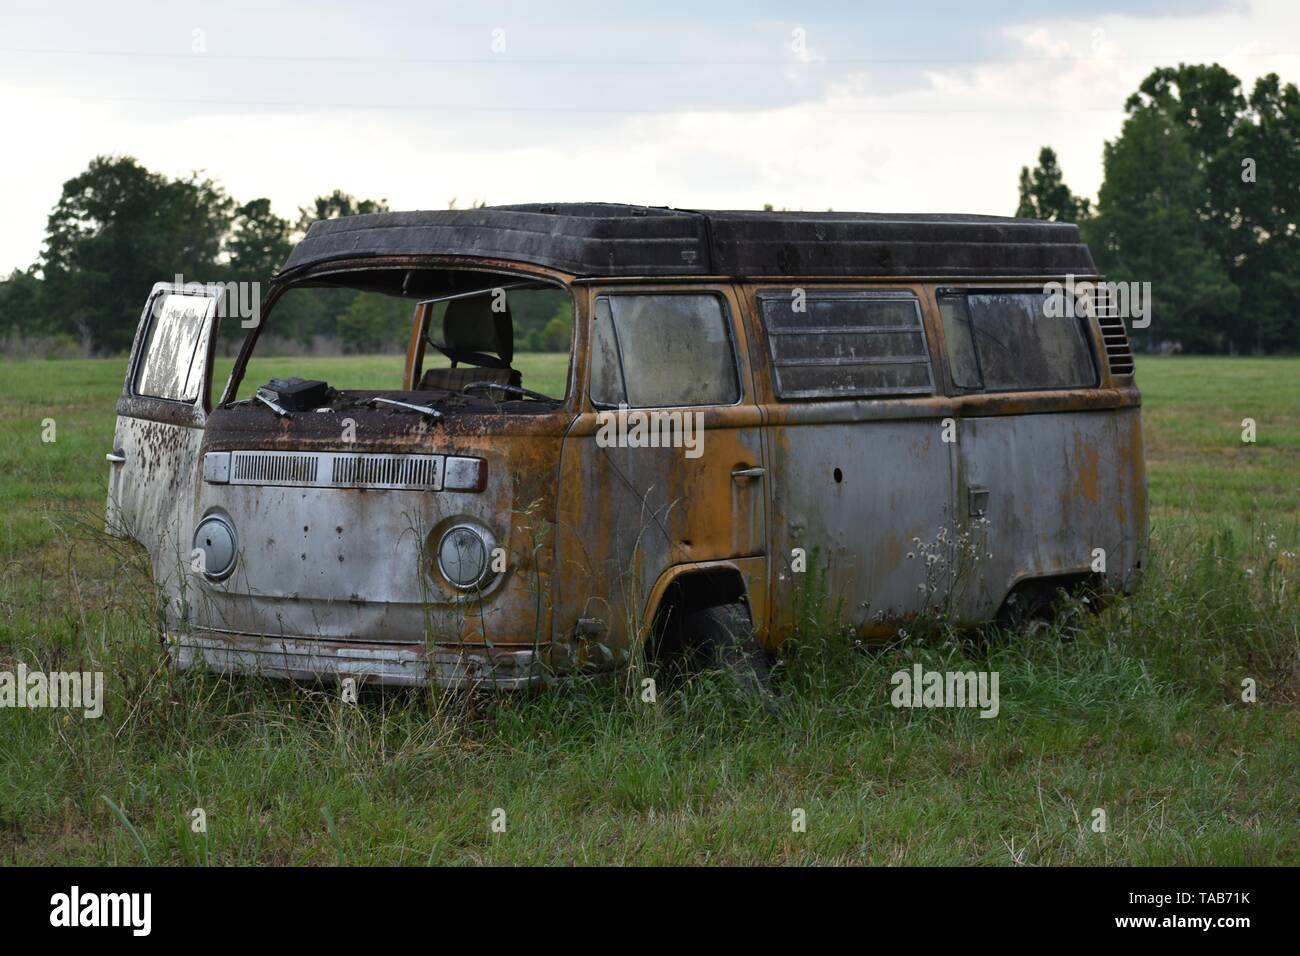 Abandoned 1976 Volkswagen Bus sitting in a field. Stock Photo